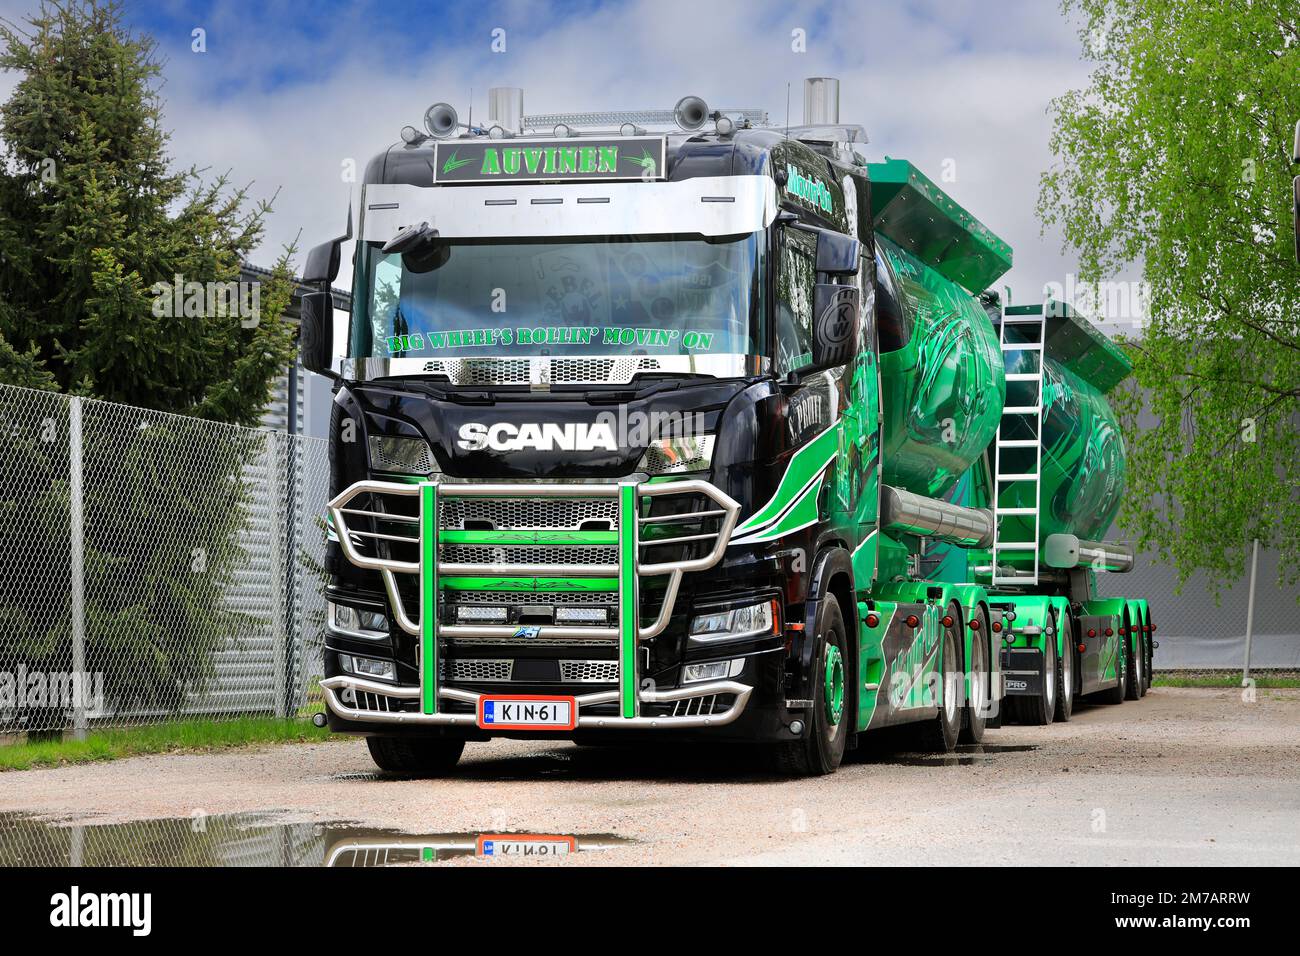 Beautifully customized green Scania R540 tank truck Movin' On for bulk transport of Kuljetus Auvinen Oy parked. Salo, Finland. May 29, 2022. Stock Photo